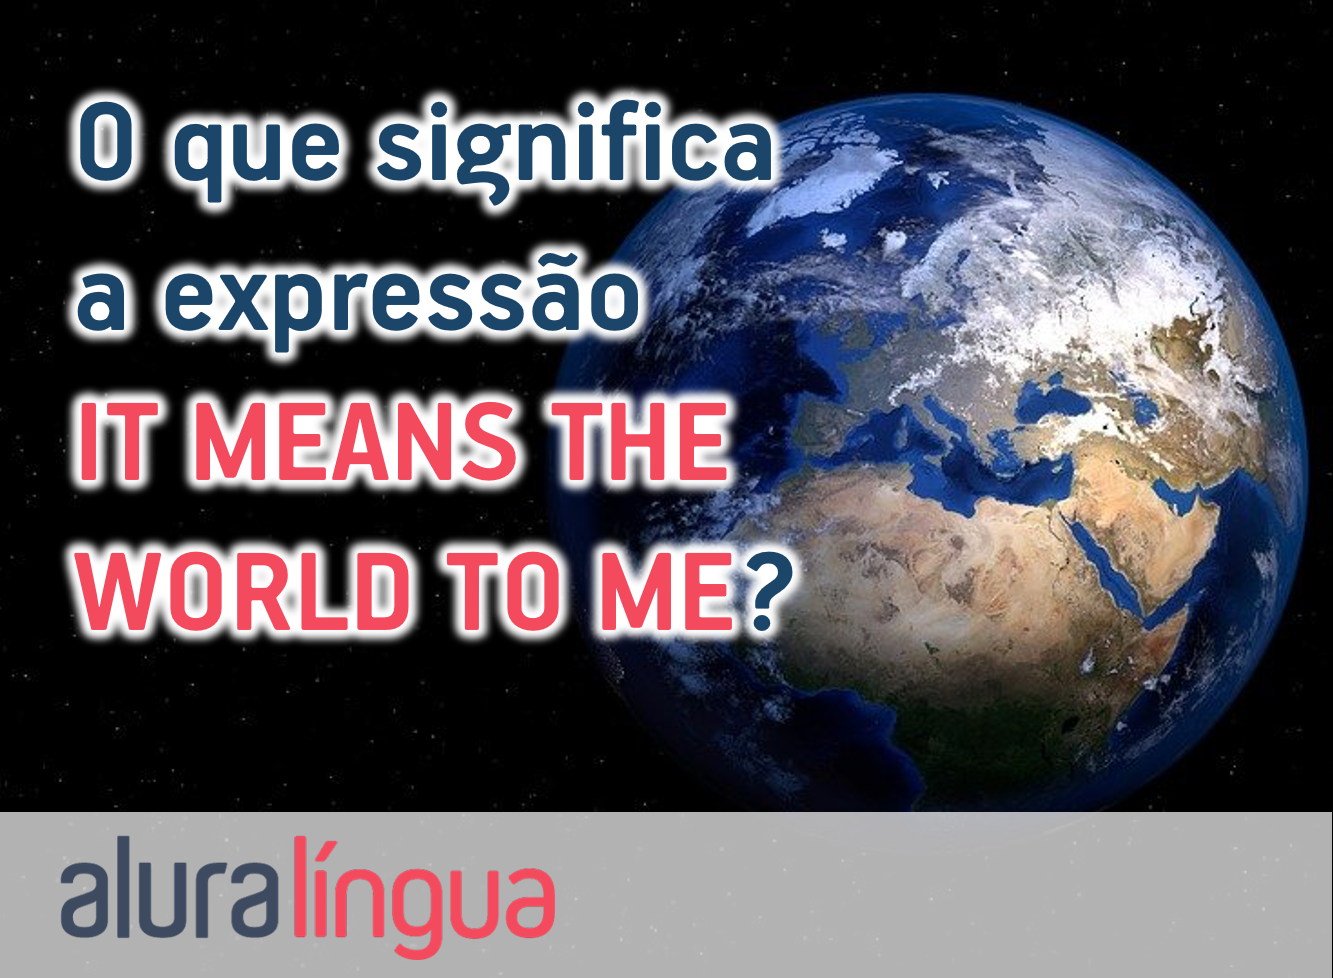 O que significa a expressão IT MEANS THE WORLD TO ME?